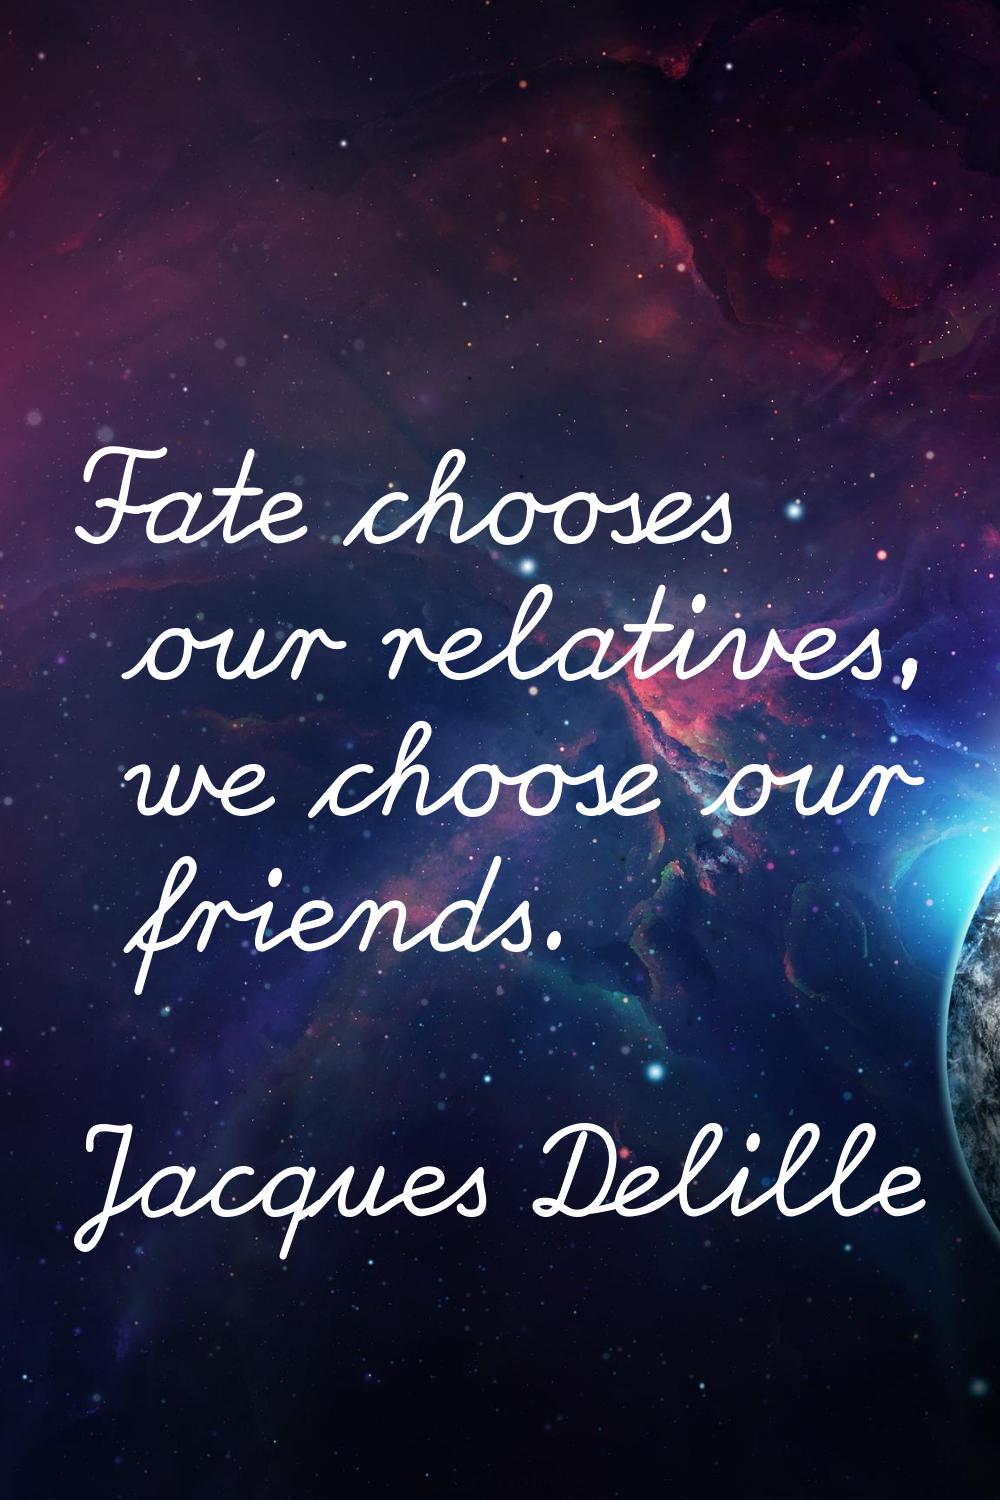 Fate chooses our relatives, we choose our friends.